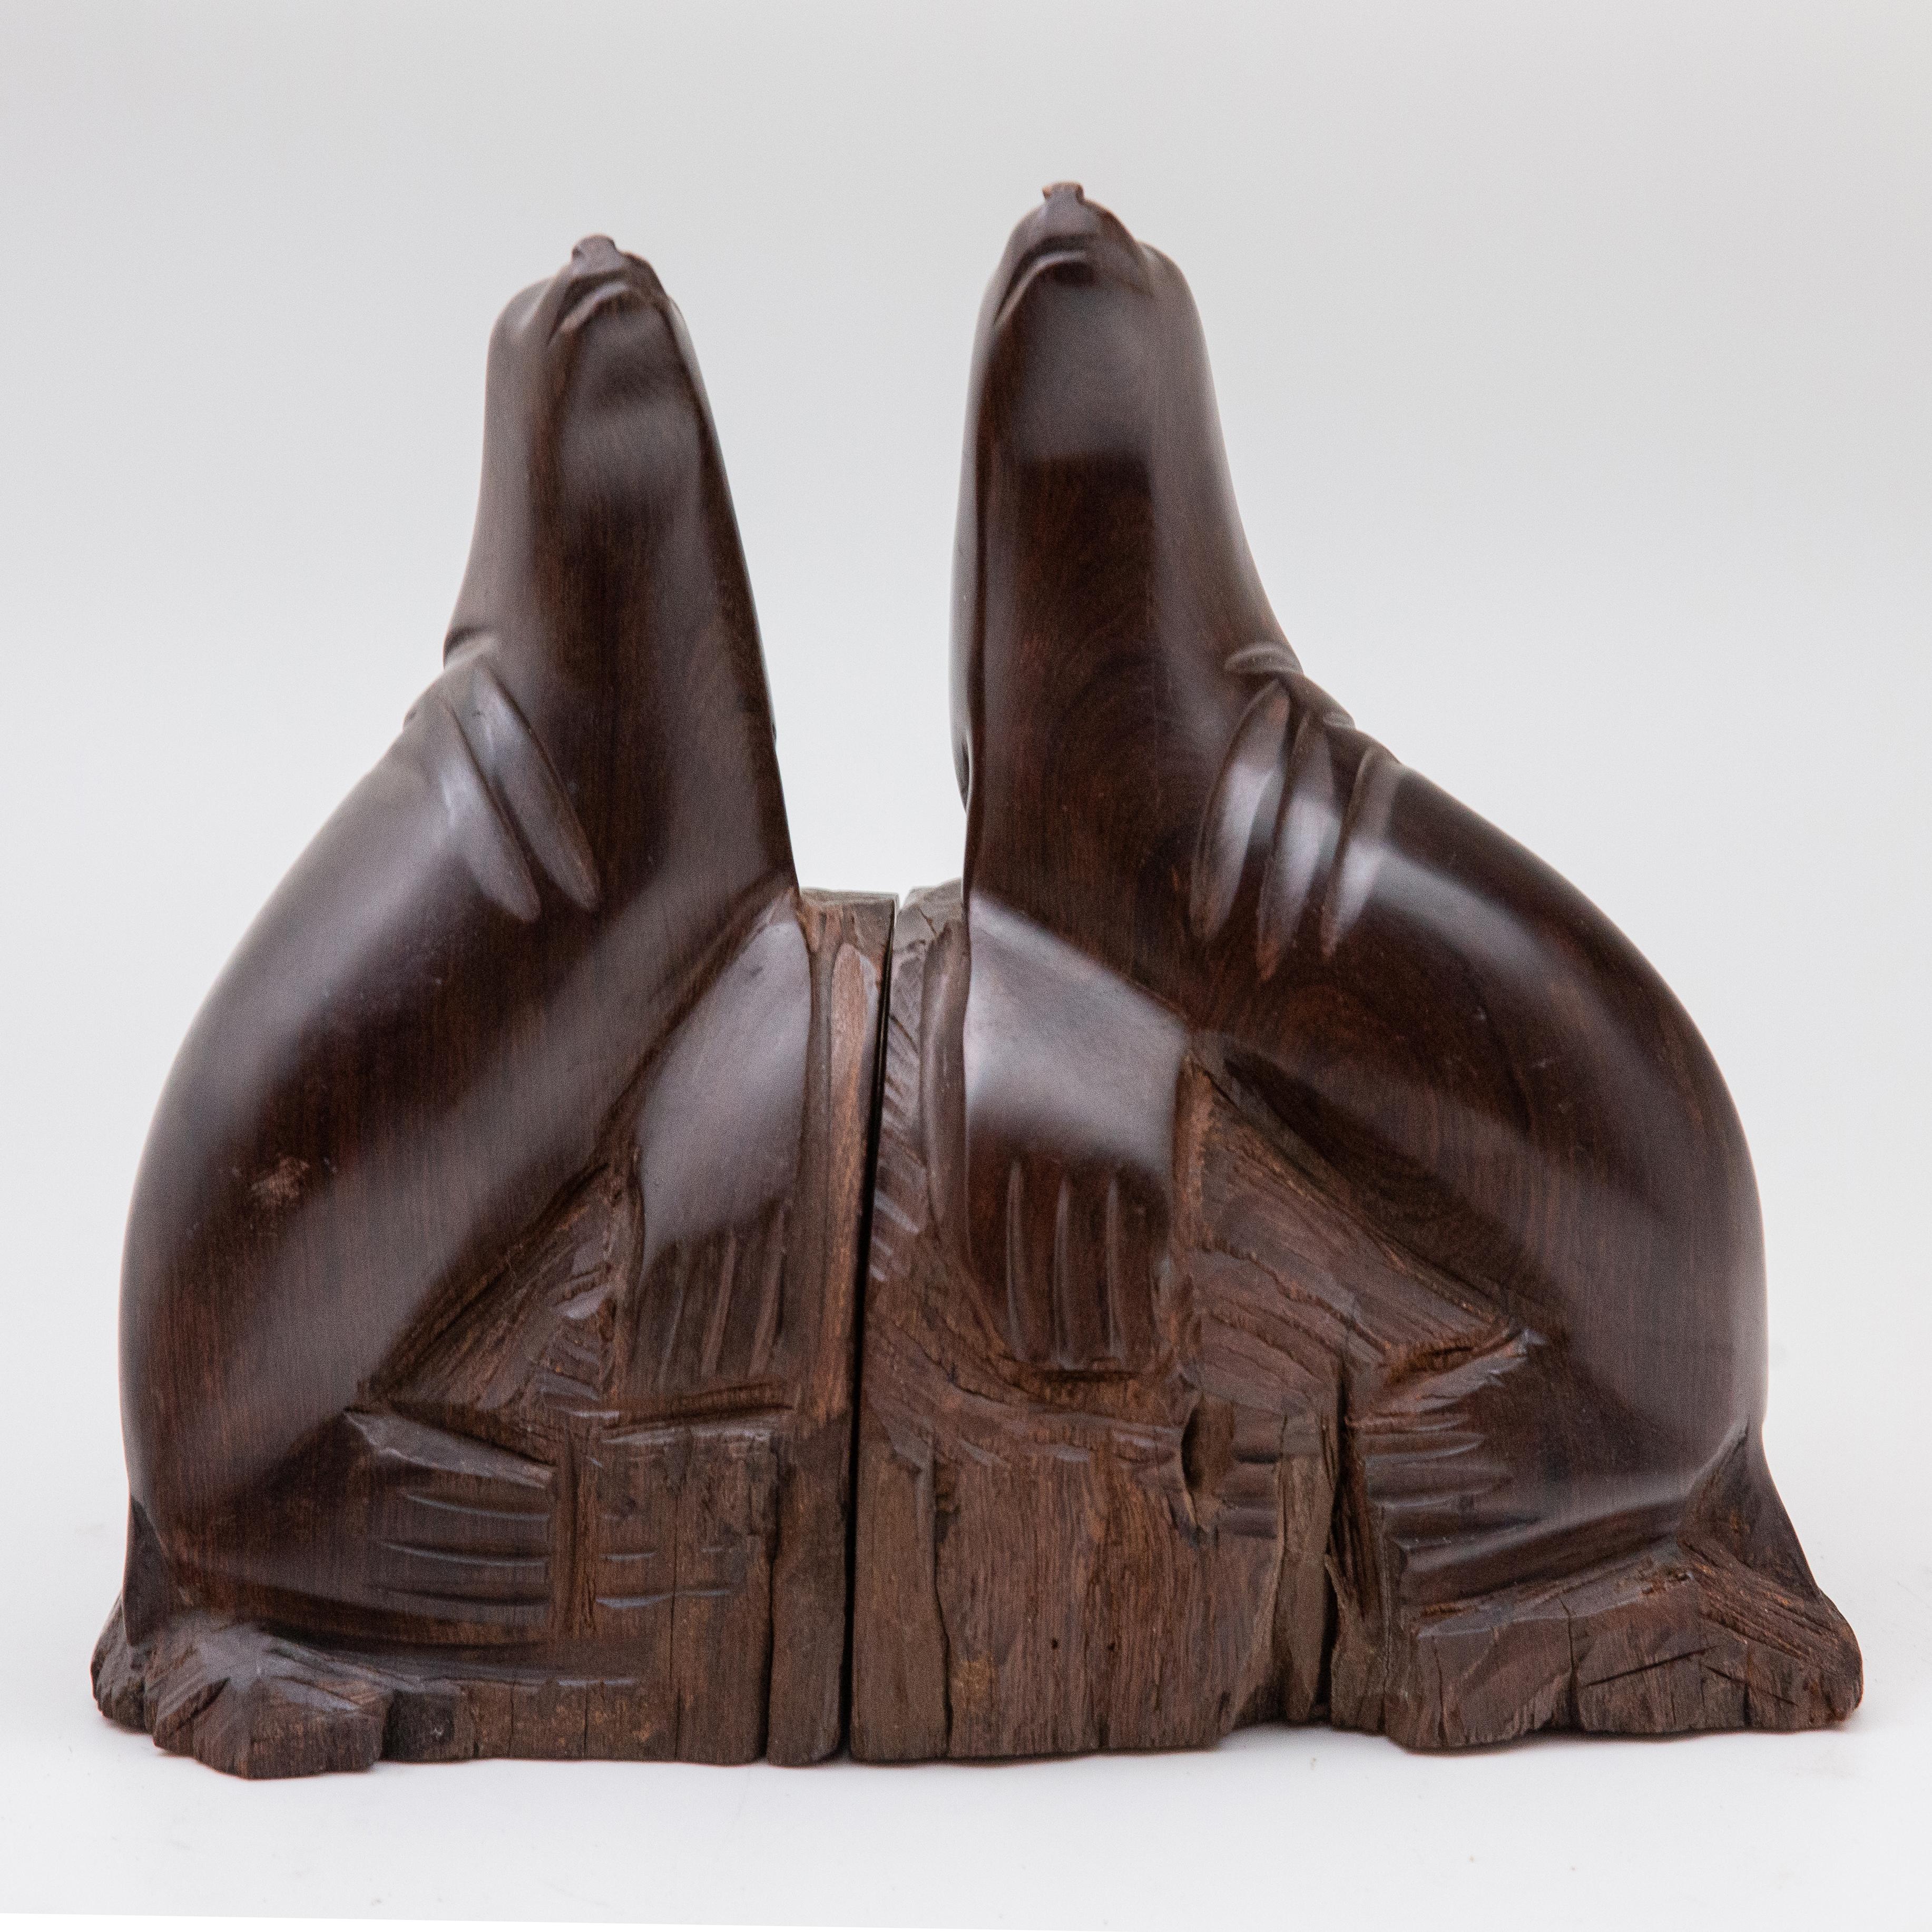 20th Century Hand-Carved Pair of Ironwood Sea Lion Bookends